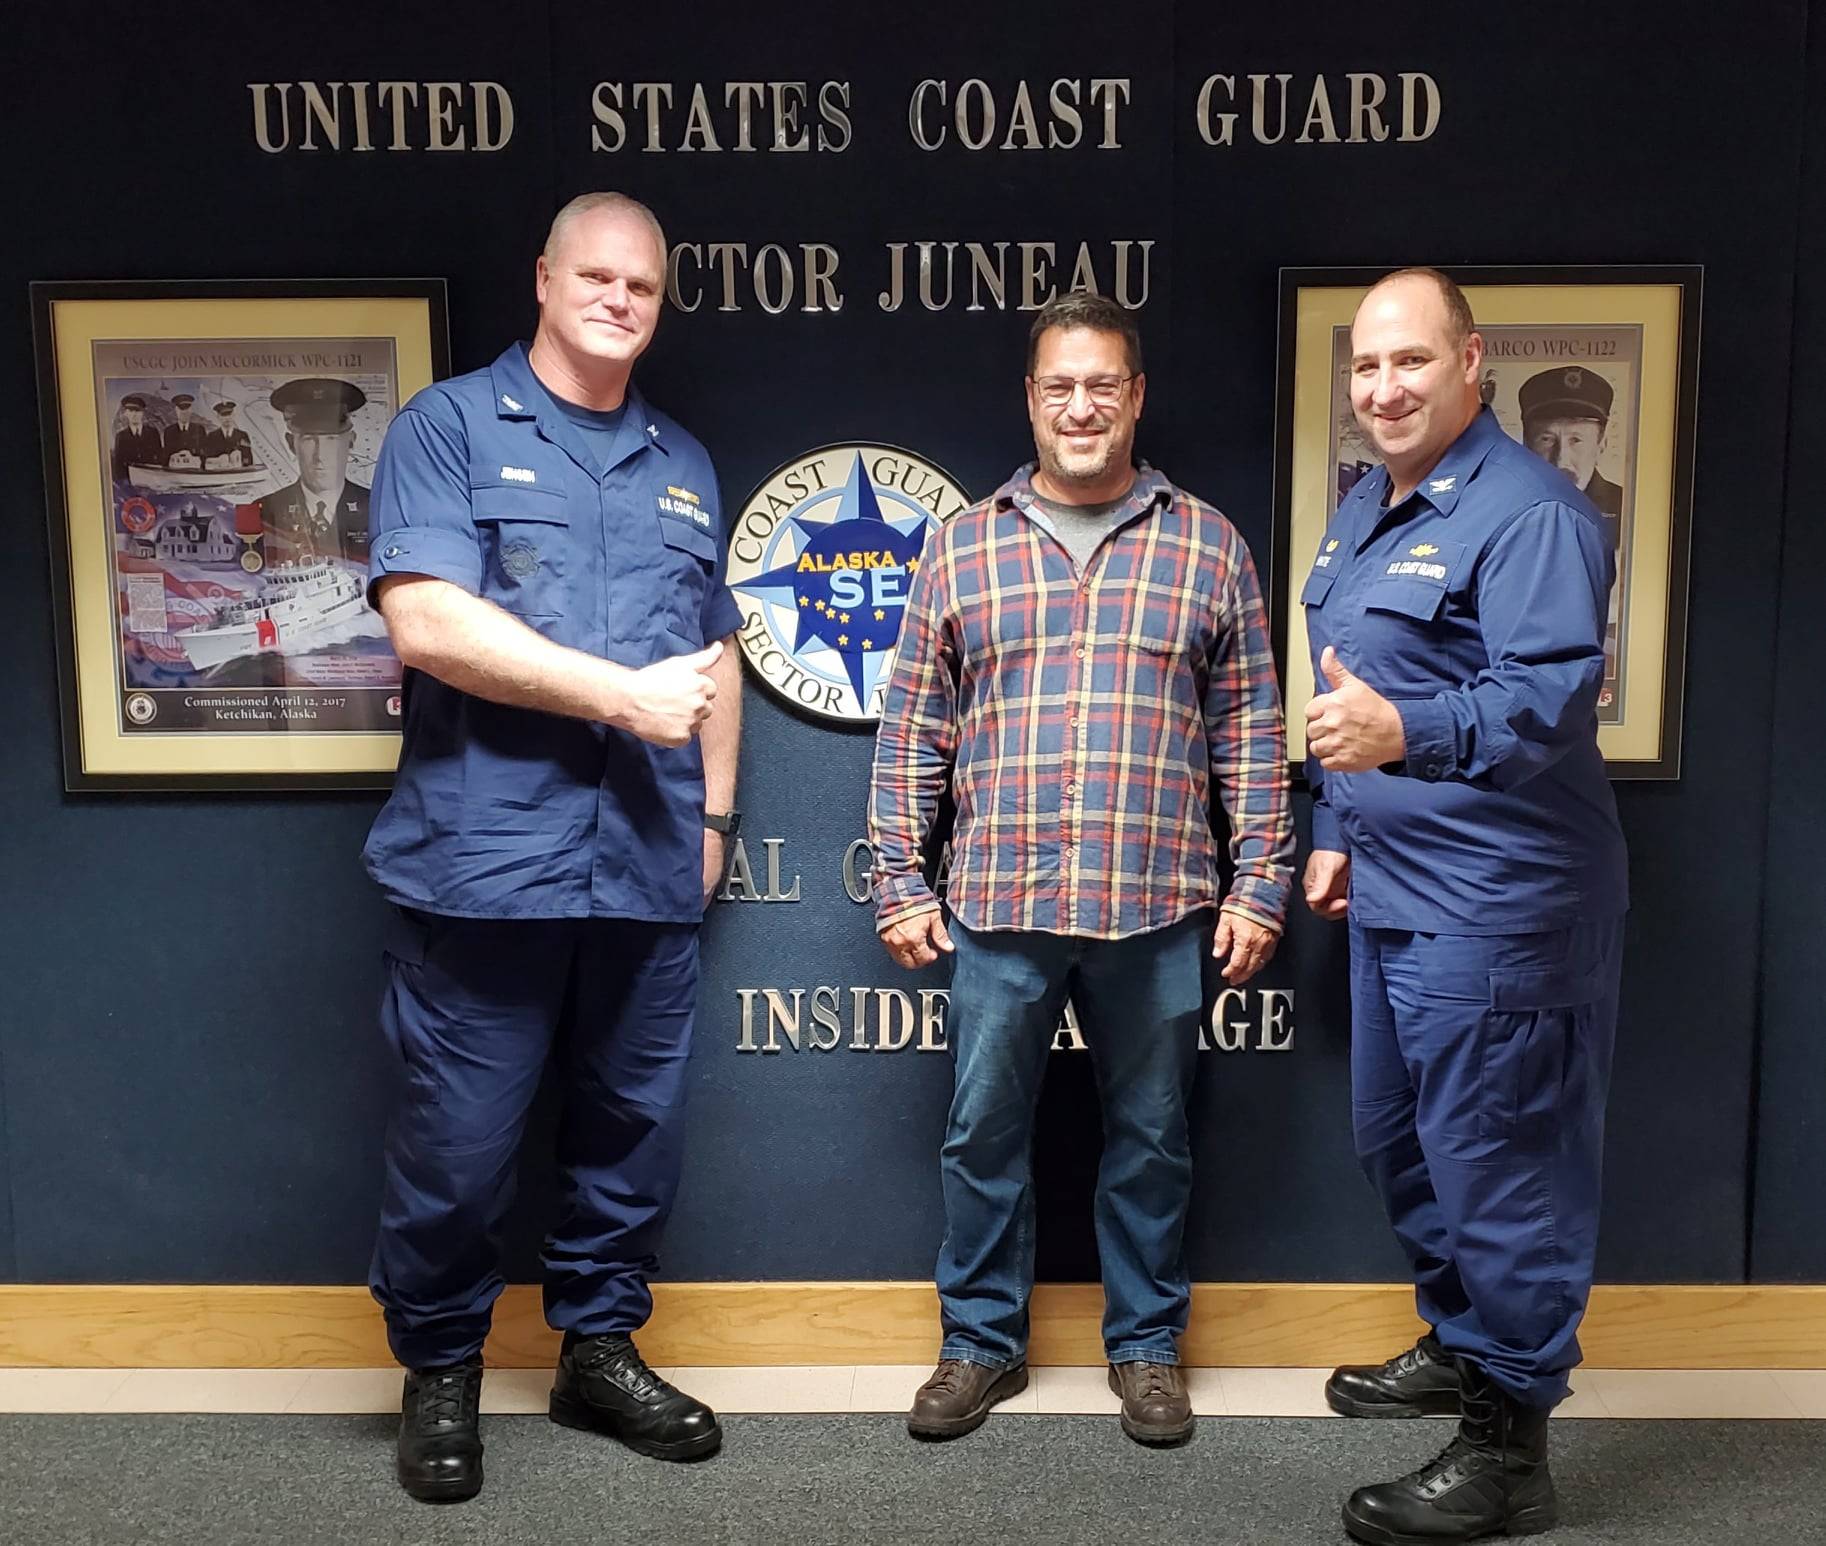 Incoming Coast Guard Sector Juneau commander Capt. Darwin A. Jensen, left, and outgoing commander Capt. Stephen R. White, right, congratulate Herman Cestero, center, for his quick action in rescuing a fisherman in distress on June 24, 2021. (Michael S. Lockett / Juneau Empire)